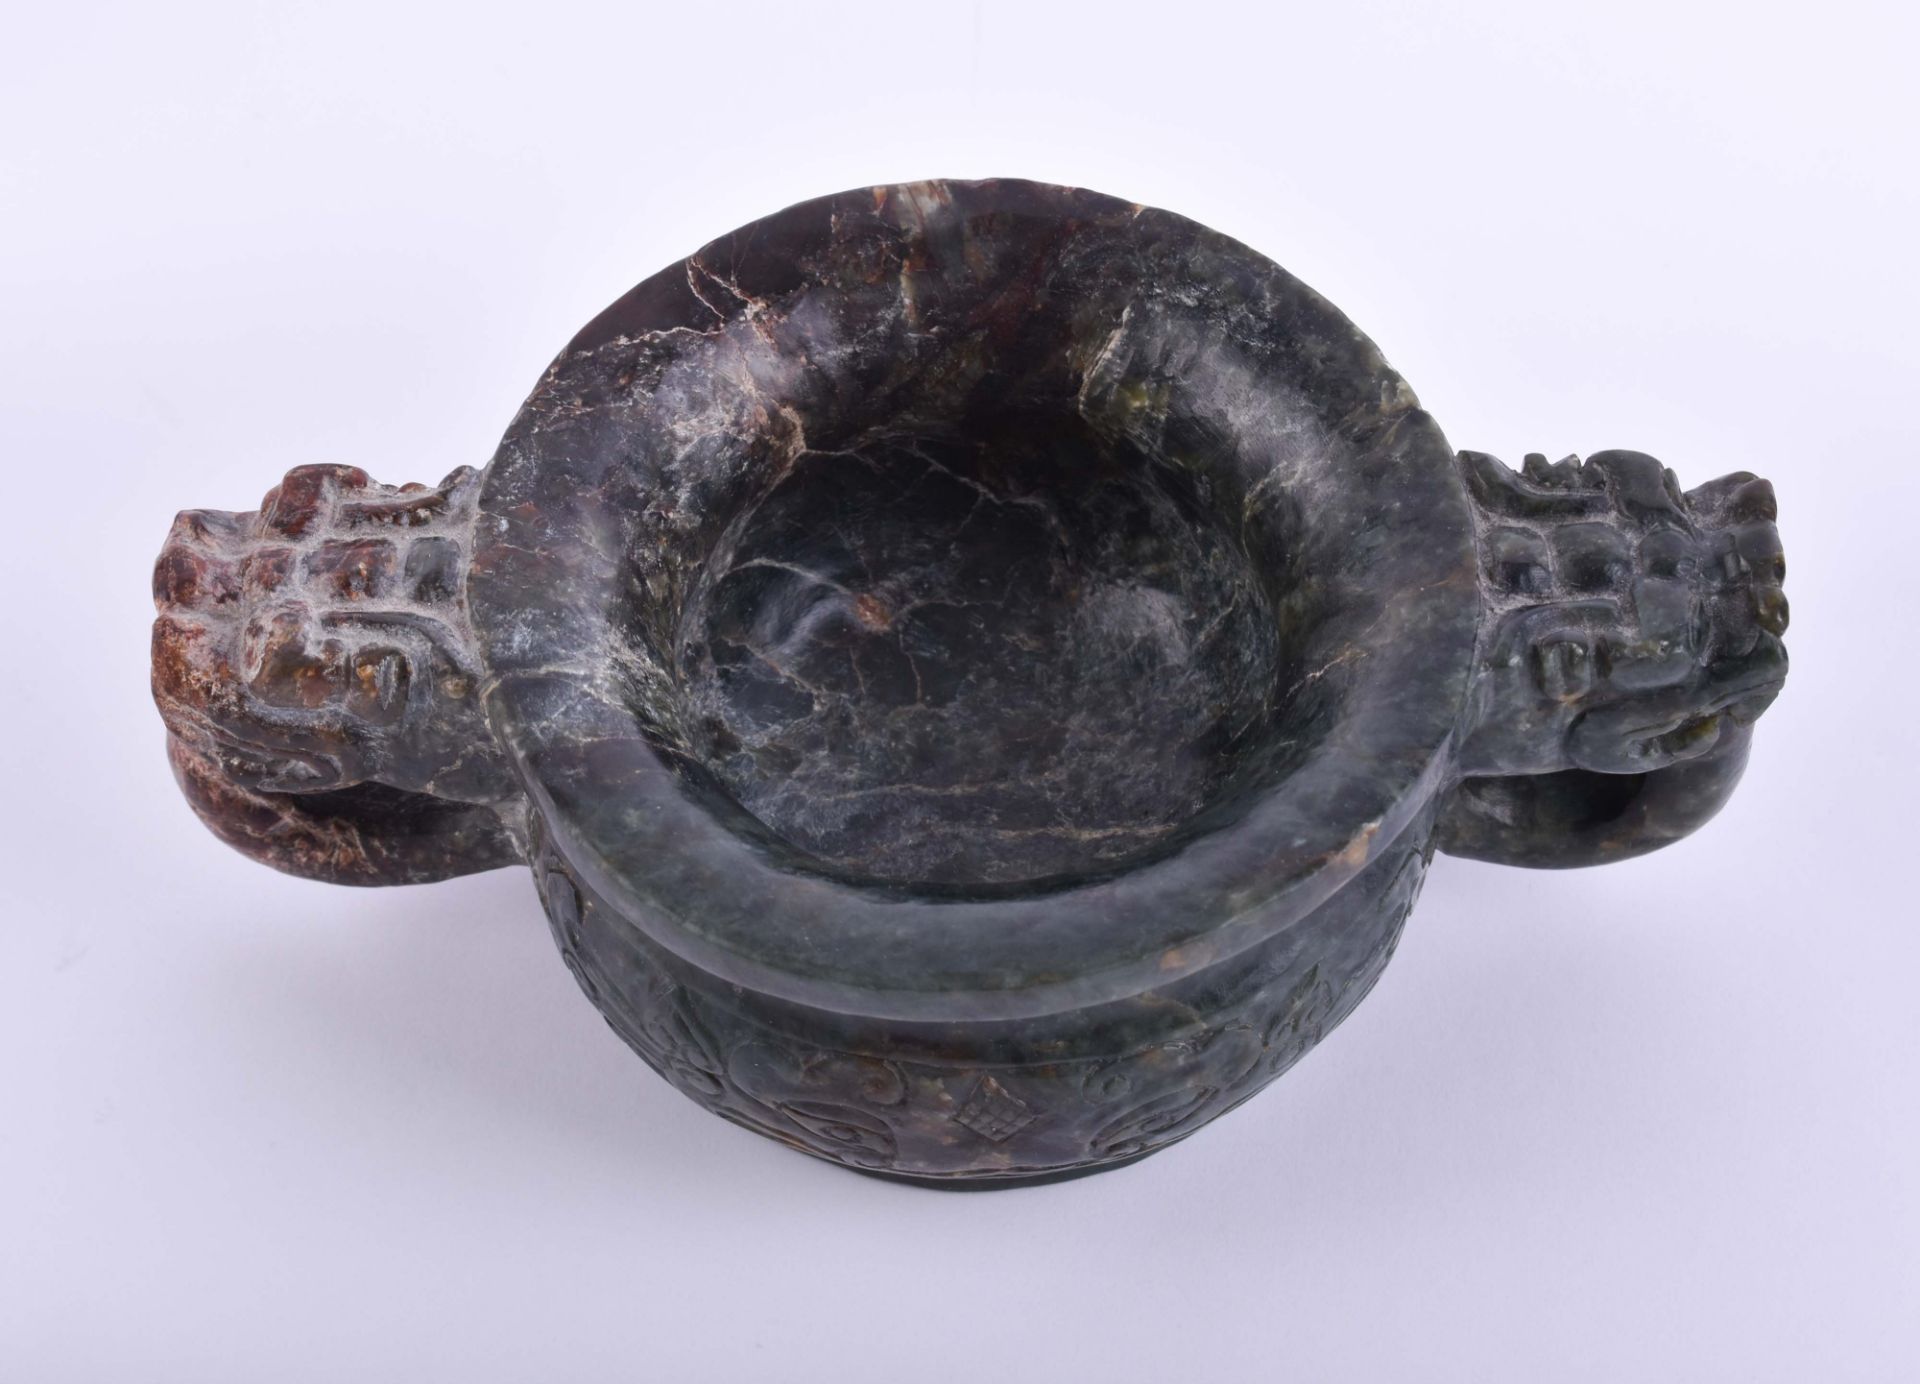  Jade vessel China Qing dynasty - Image 5 of 6